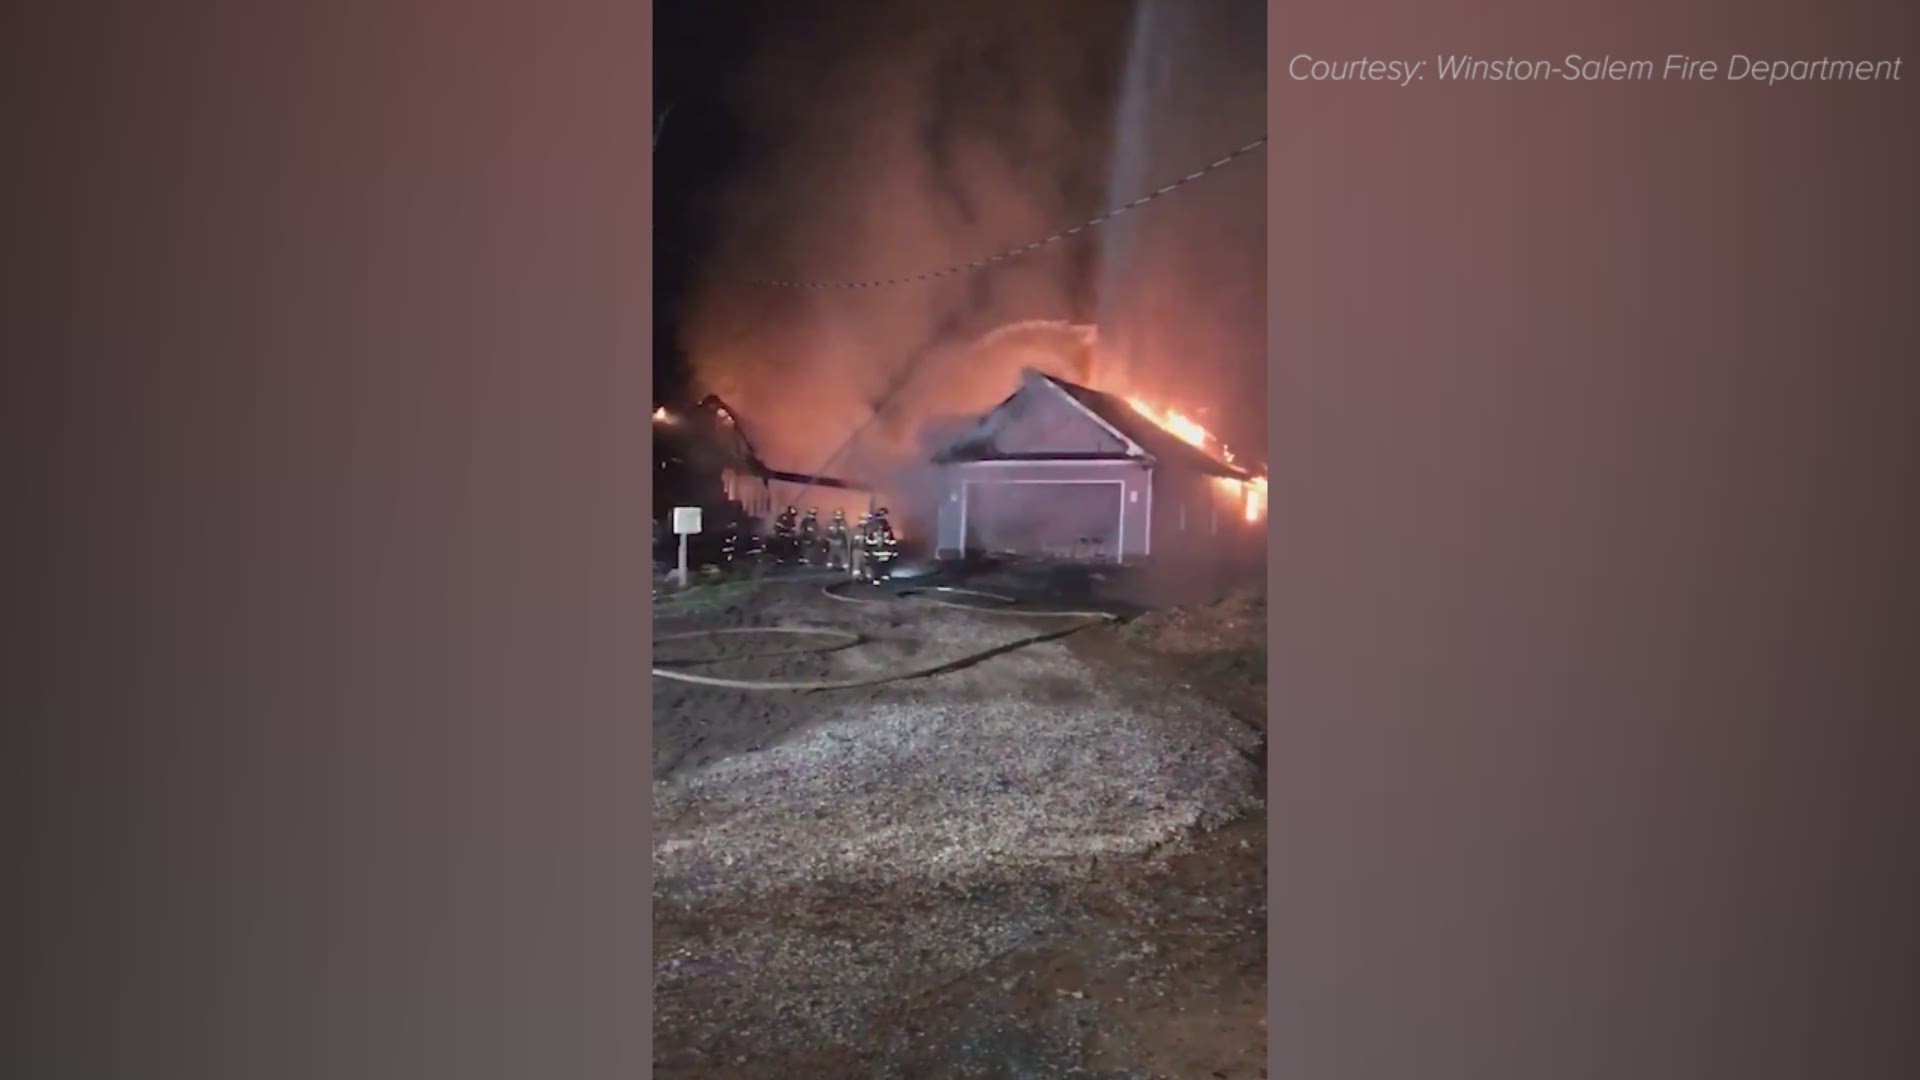 A house caught on fire in Winston Salem Friday night. According to the Winston-Salem Fire Department, the fire occurred in the 4600 block of White Rock Rd.